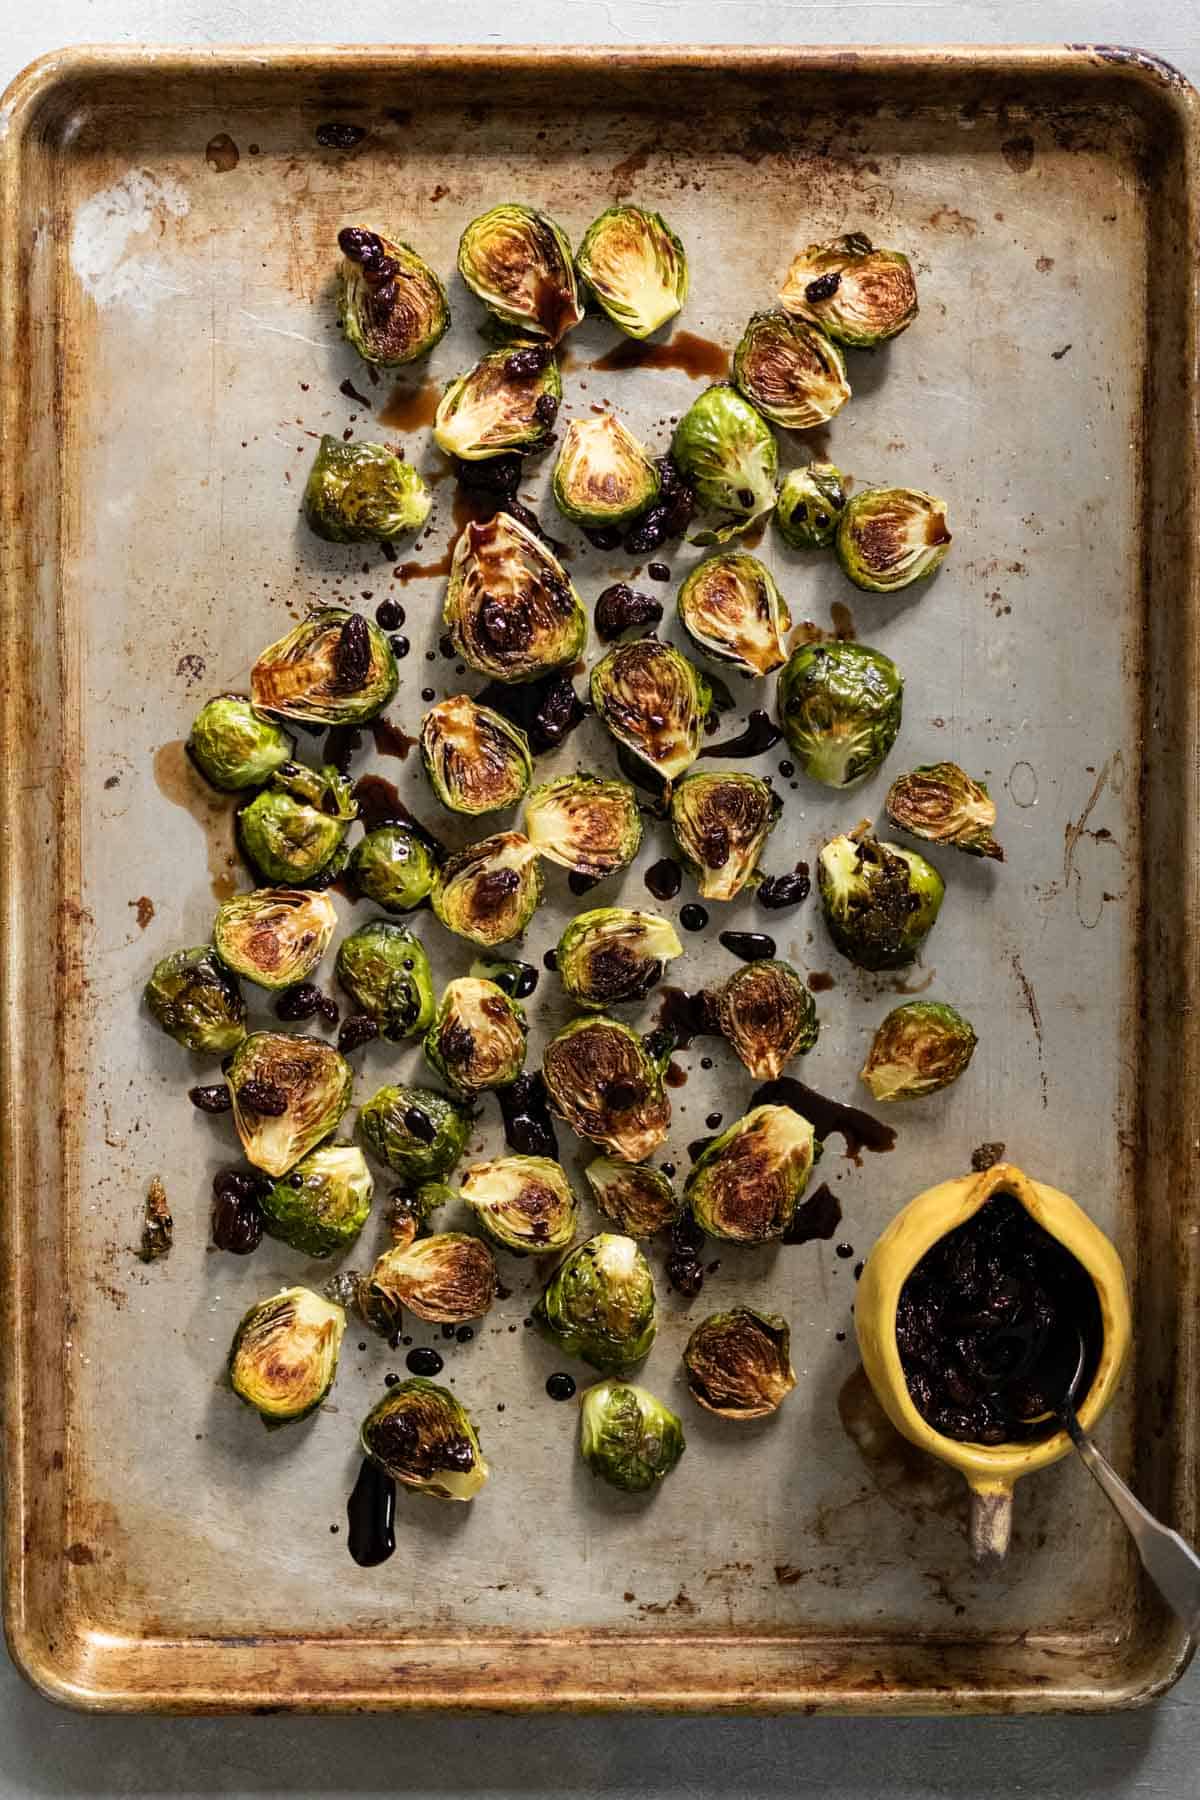 pan-roasted Brussels sprouts drizzled with balsamic.